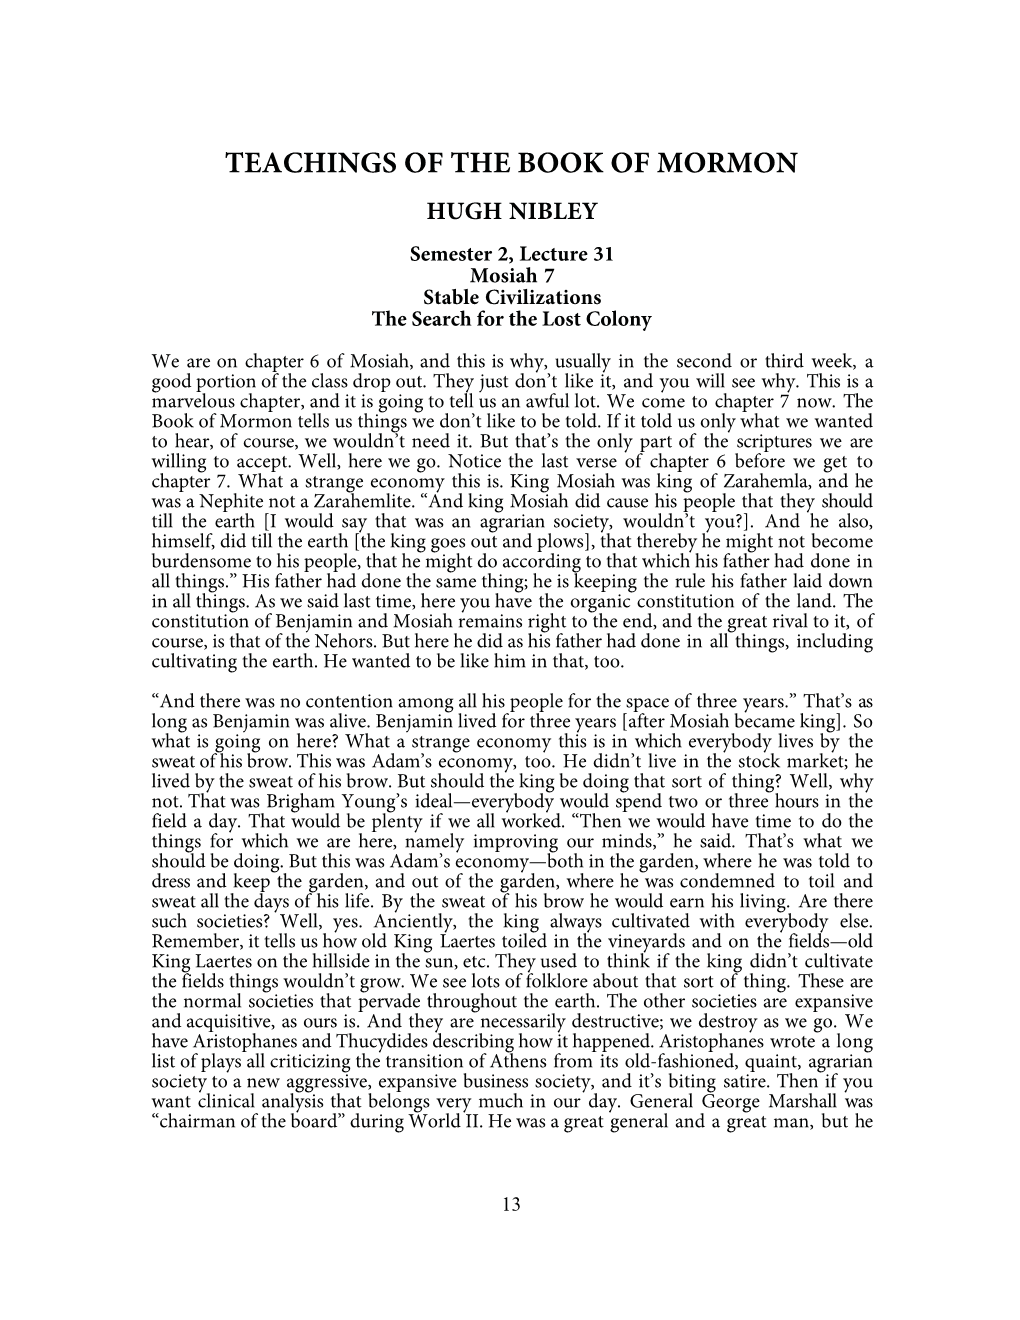 TEACHINGS of the BOOK of MORMON HUGH NIBLEY Semester 2, Lecture 31 Mosiah 7 Stable Civilizations the Search for the Lost Colony